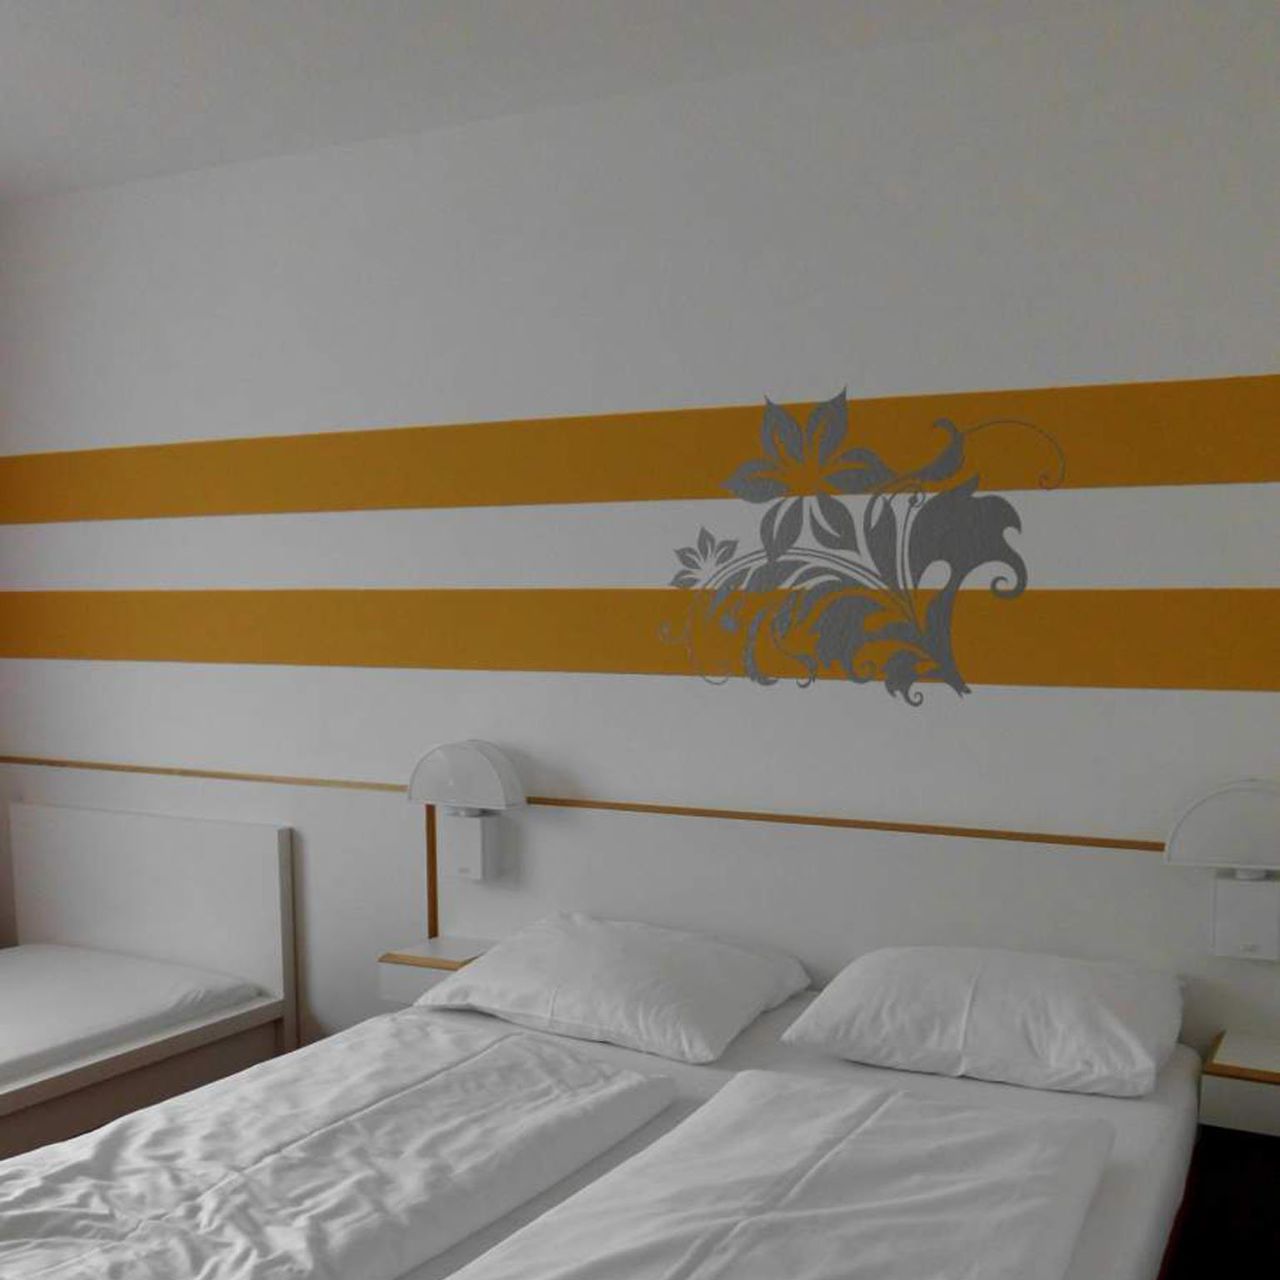 Hotel Lenas West - Vienna - Great prices at HOTEL INFO